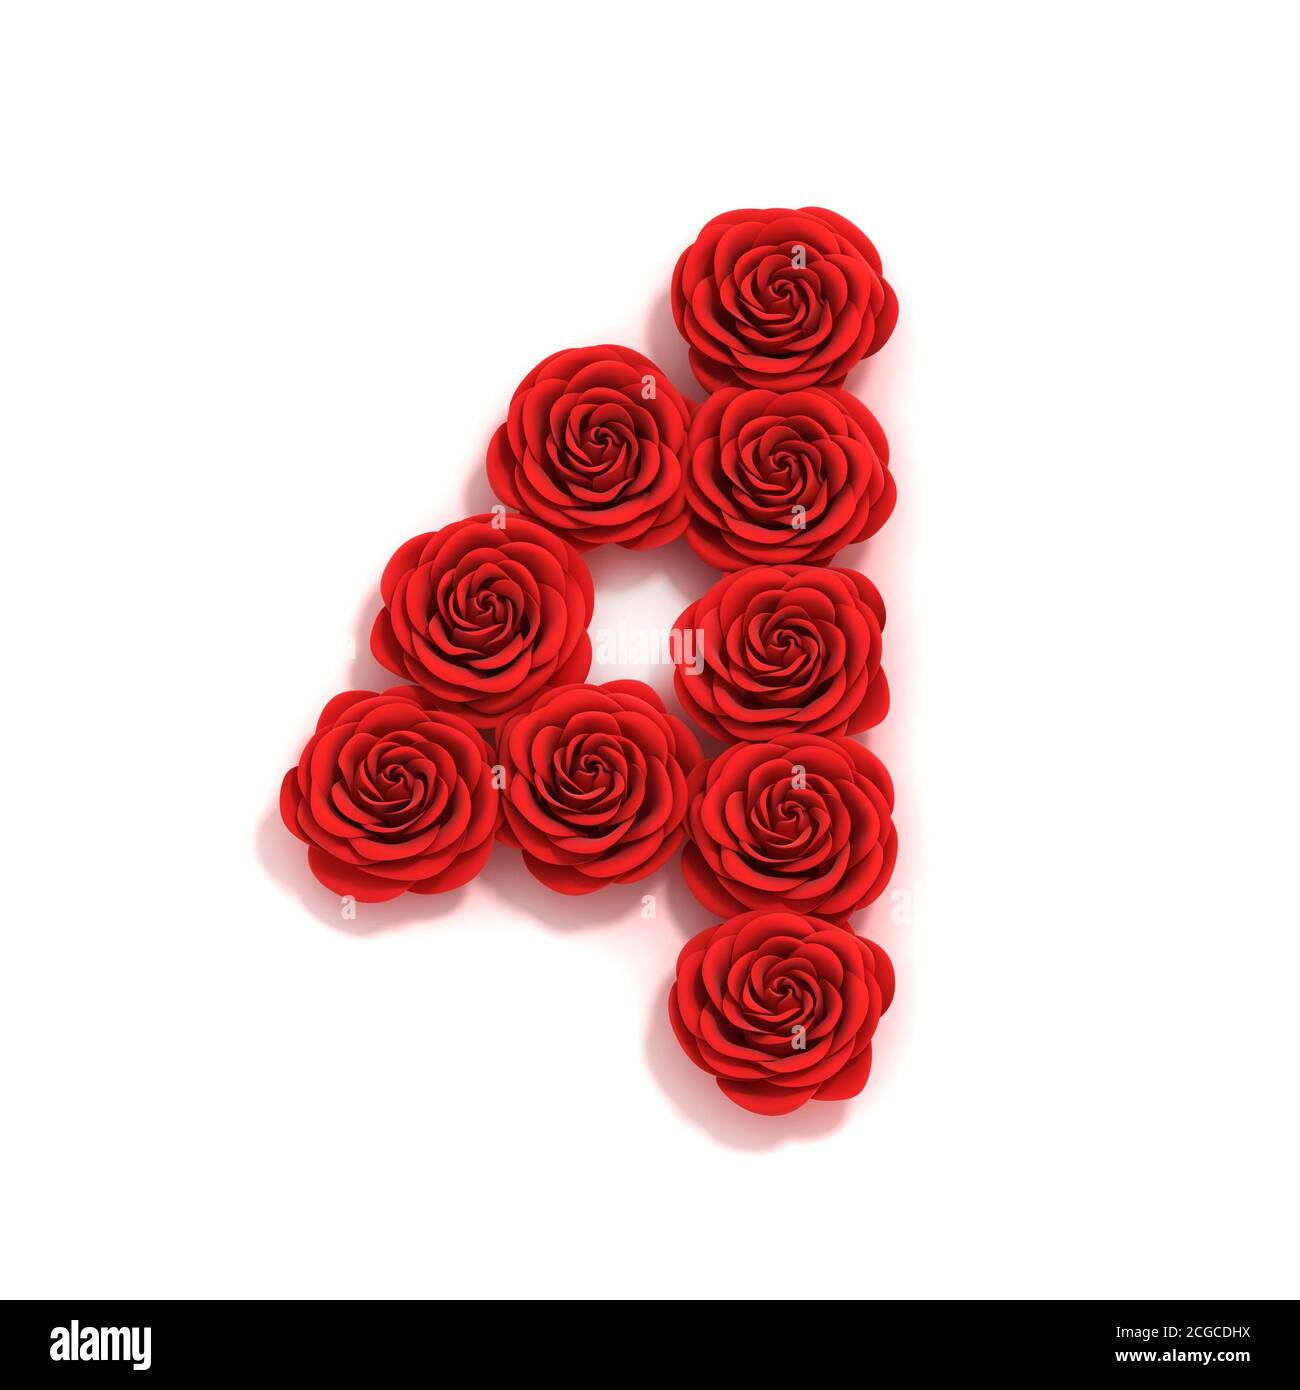 Four Red Roses High Resolution Stock Photography and Images - Alamy